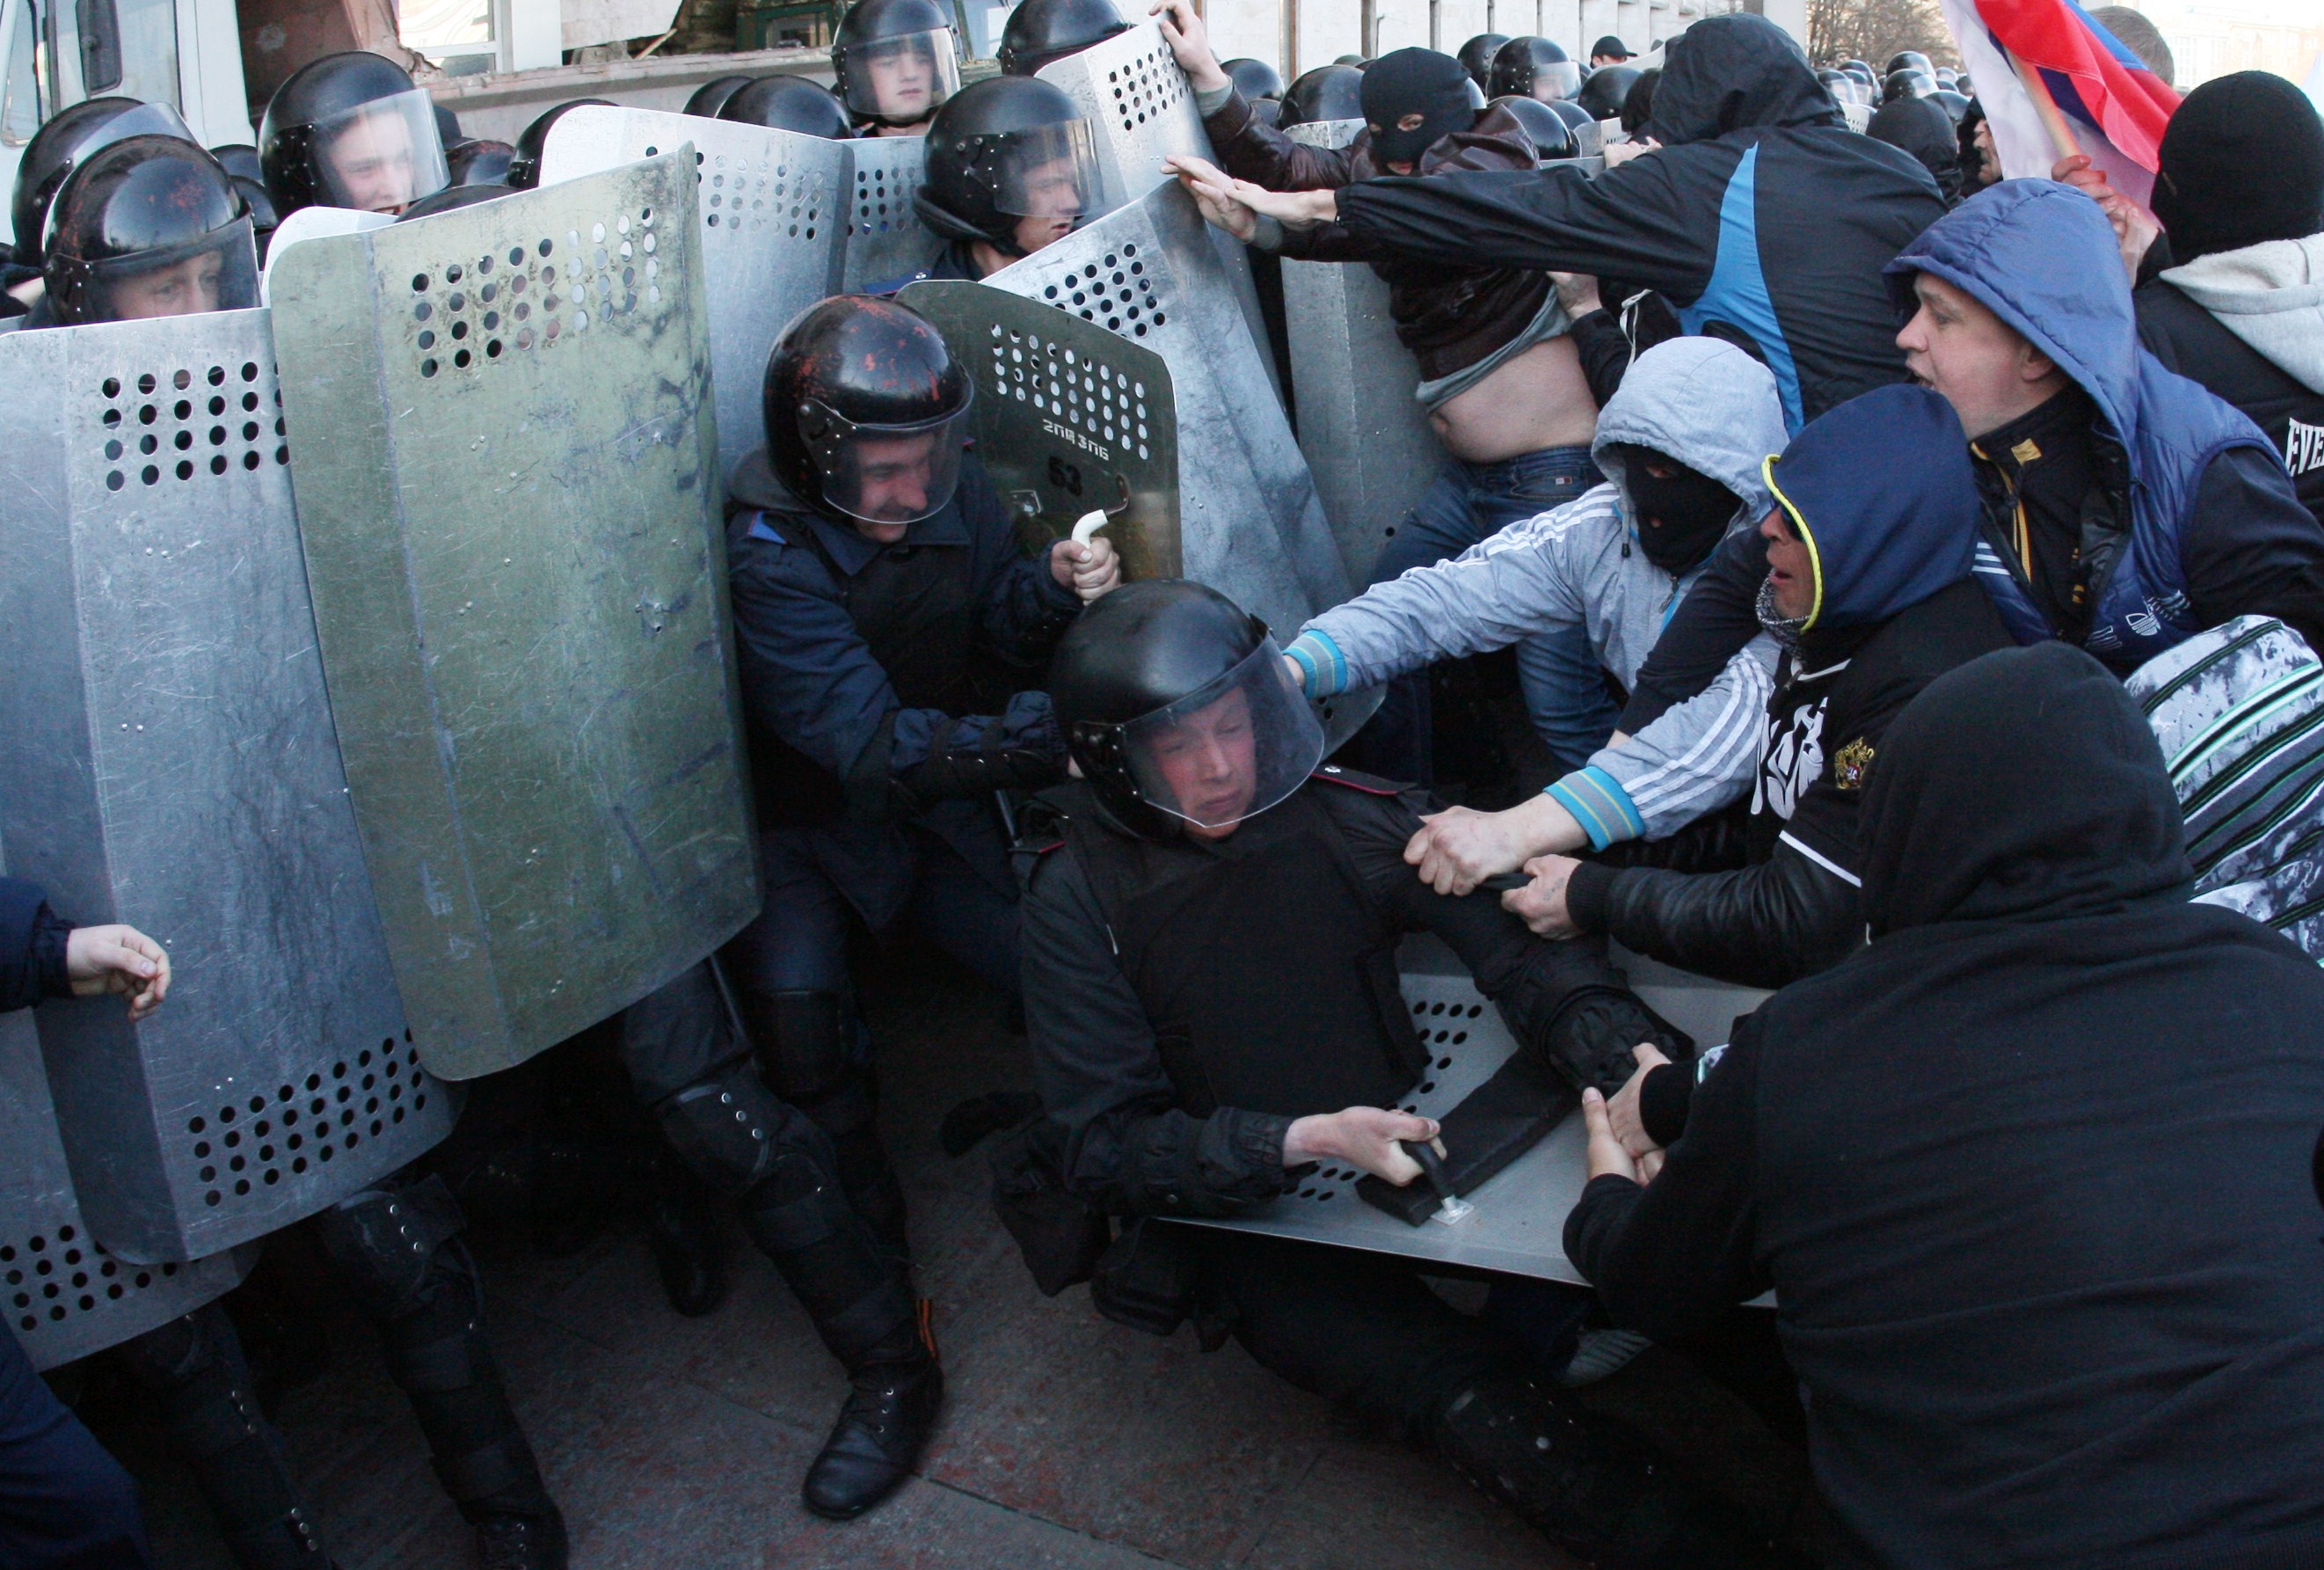 Pro-Russian supporters clash with members of the riot police as they storm the regional administration building in Donetsk, Ukraine, on April 6, 2014 (Alexander Khudoteply—AFP/Getty Images)